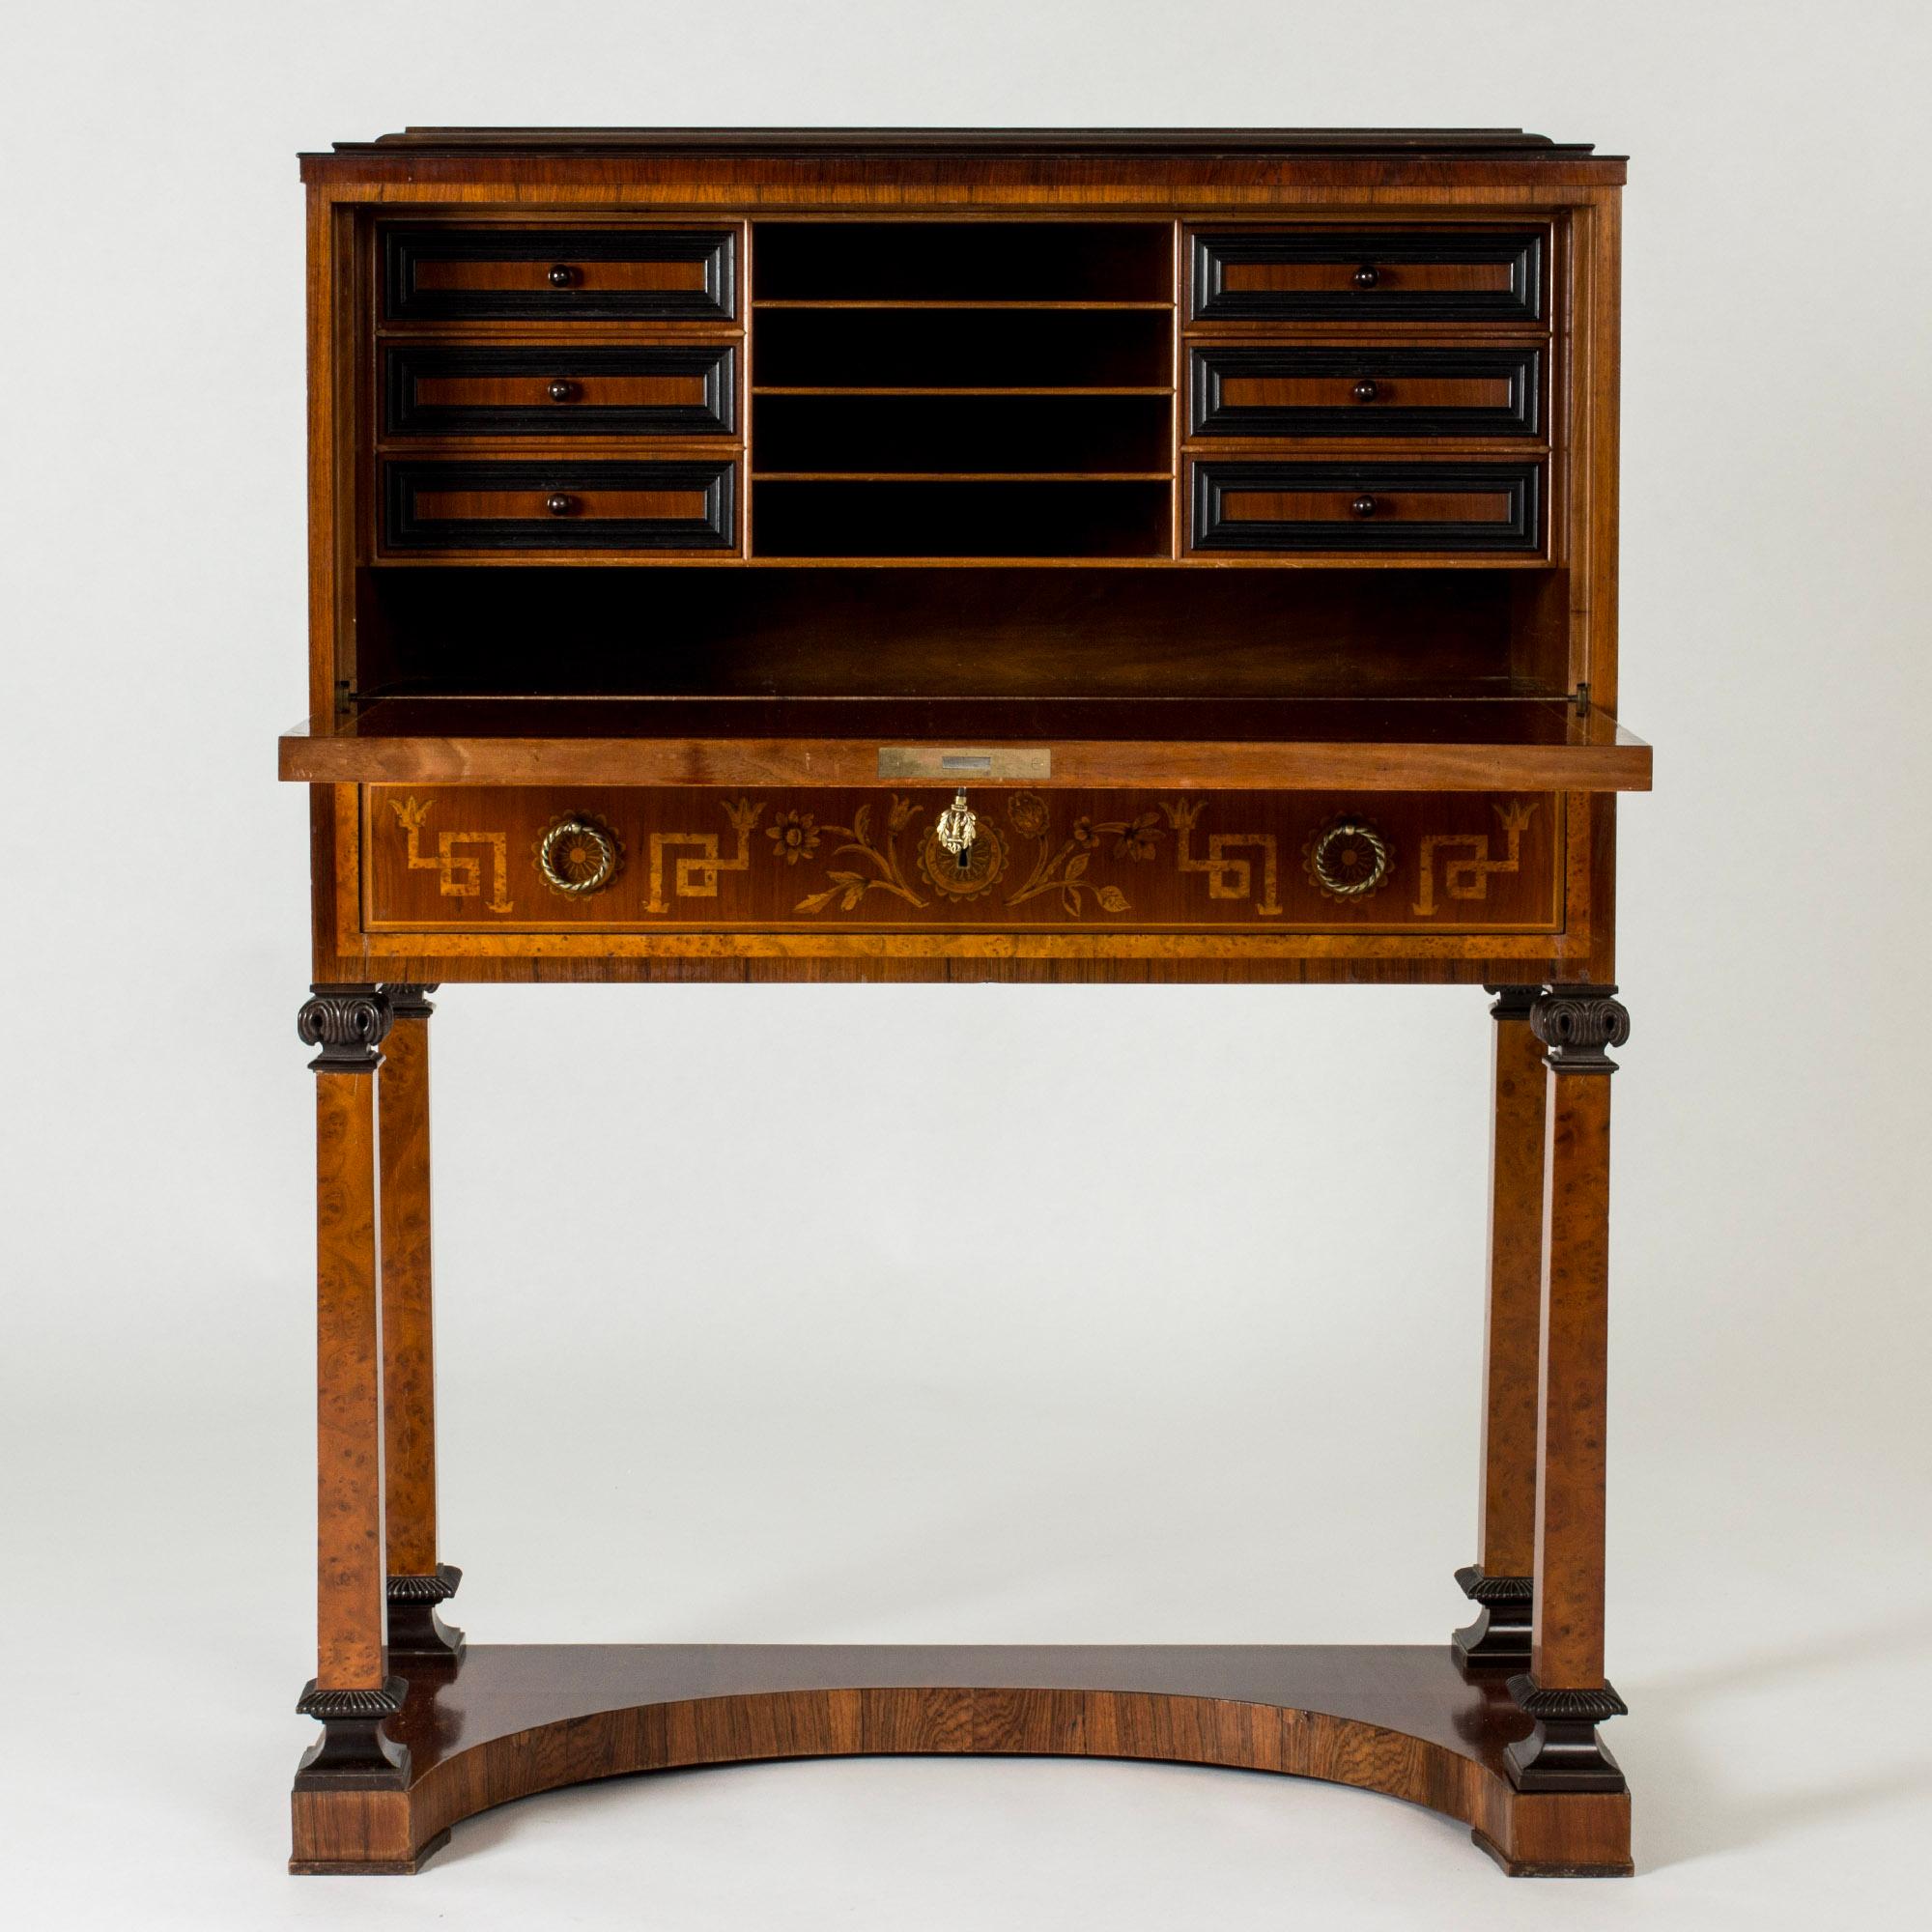 Swedish Grace Fall-front Cabinet by Axel Einar Hjorth, Sweden, 1925 For Sale 4